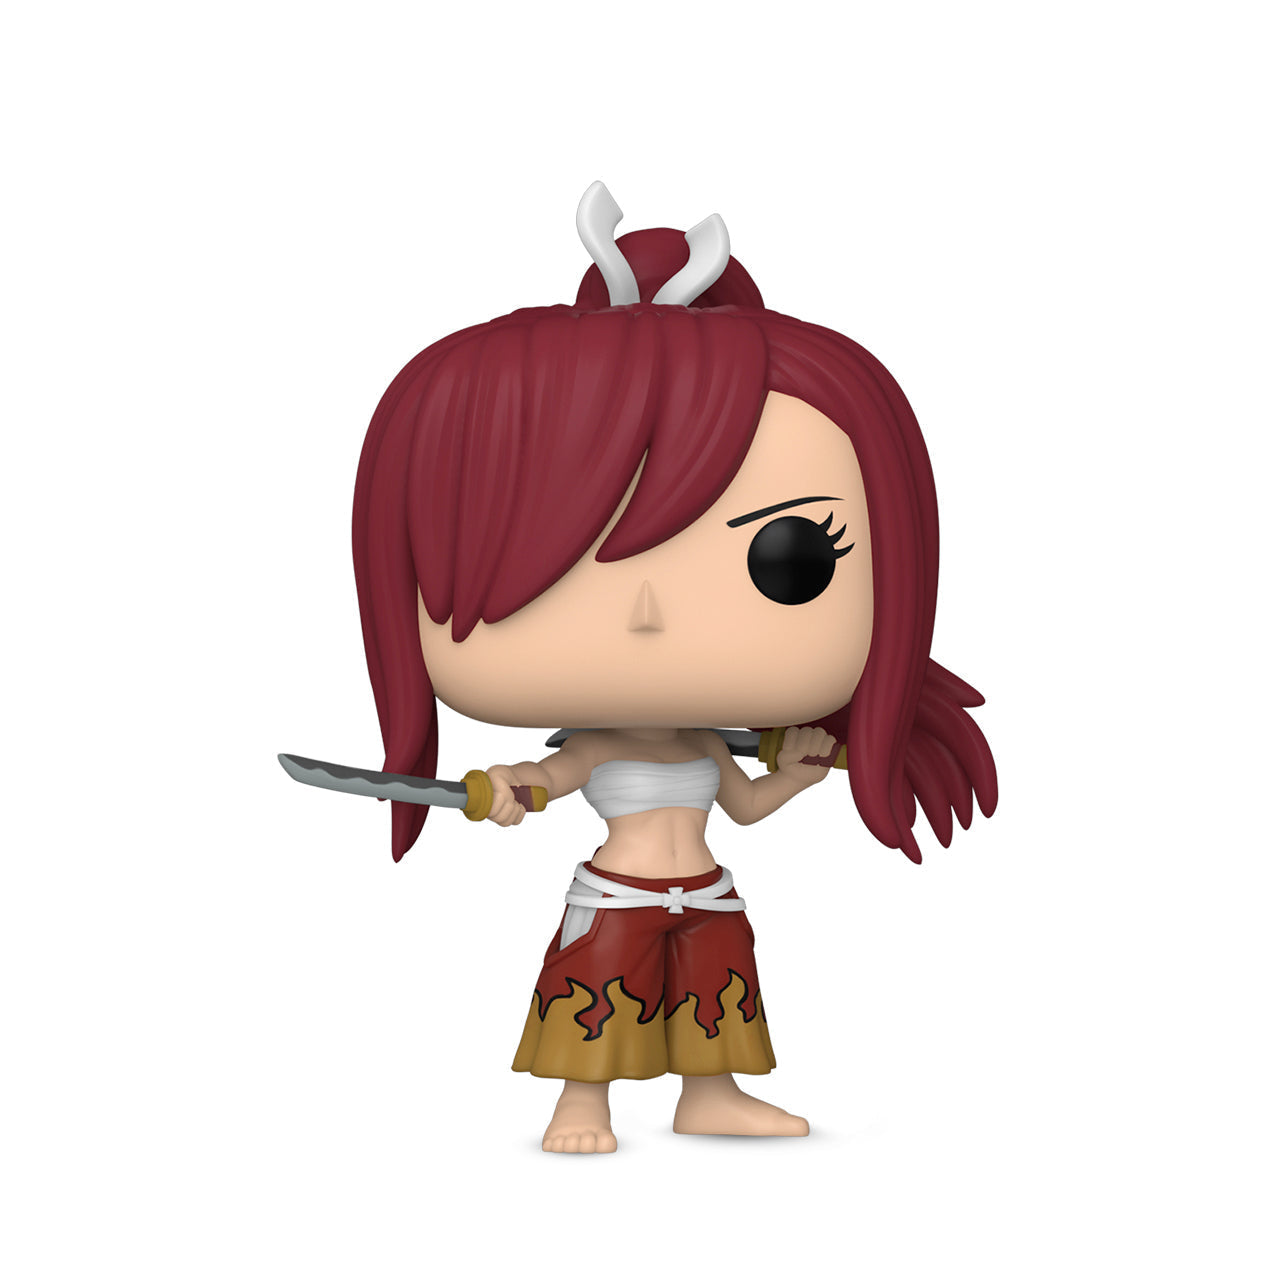 Fairy Tail - Erza Scarlet Funko Pop! image count 0